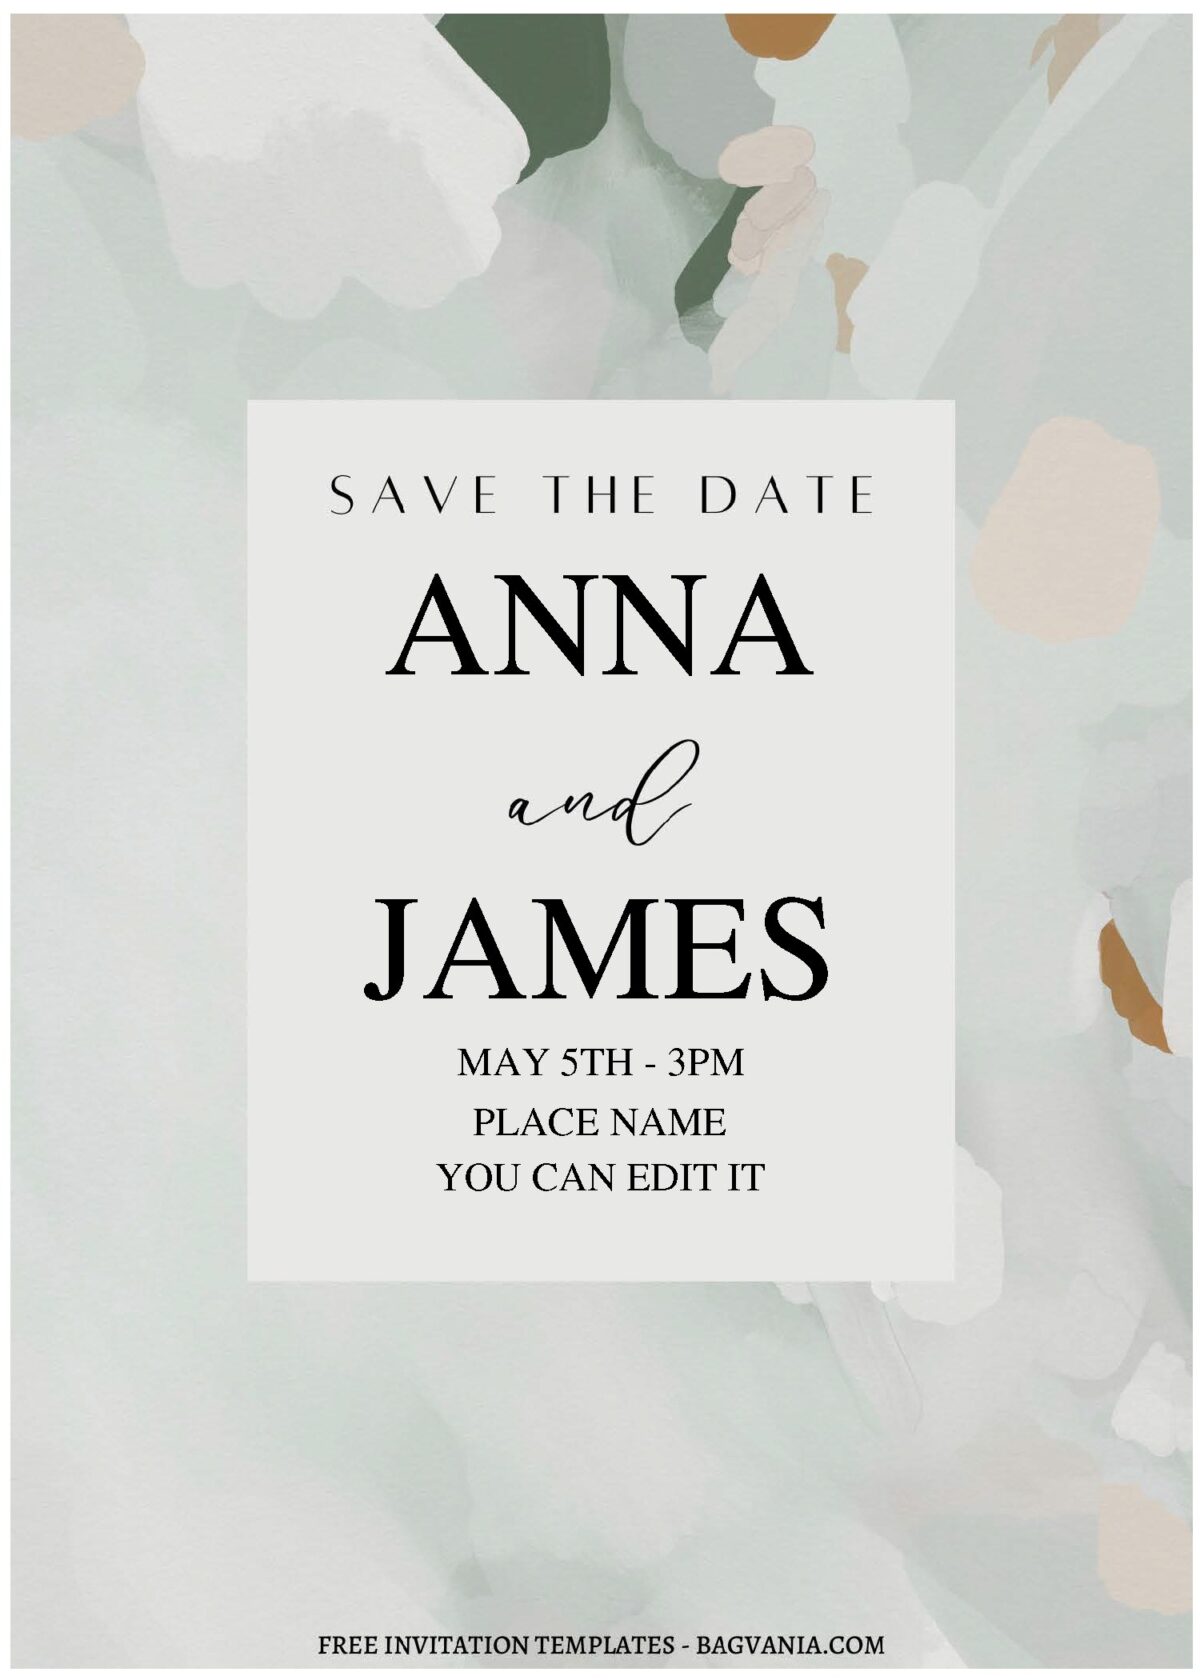 (Free Editable PDF) Picturesque Marble Save The Date Invitation Templates C